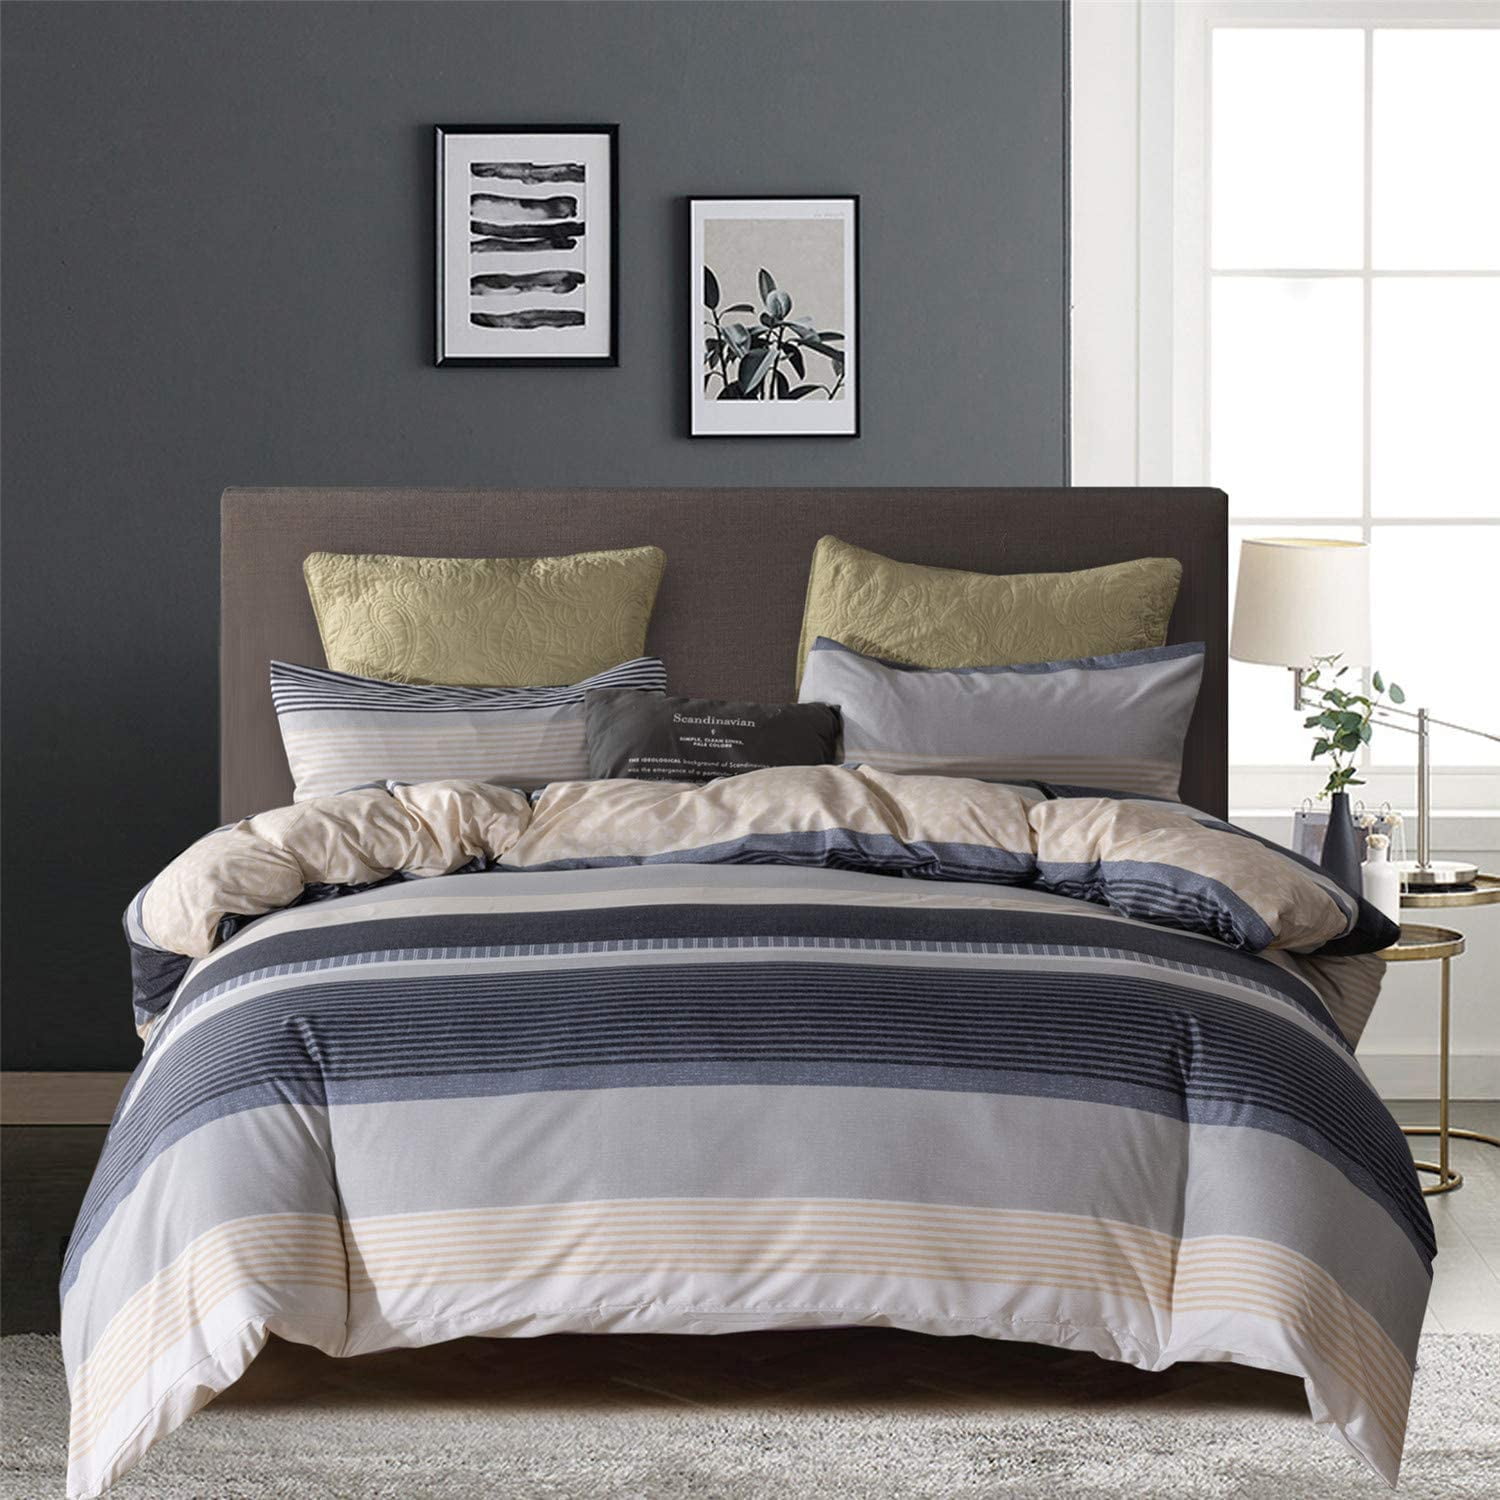 Details about   All Season Down Alternative Comforter Egyptian Cotton Black Striped Queen Size 